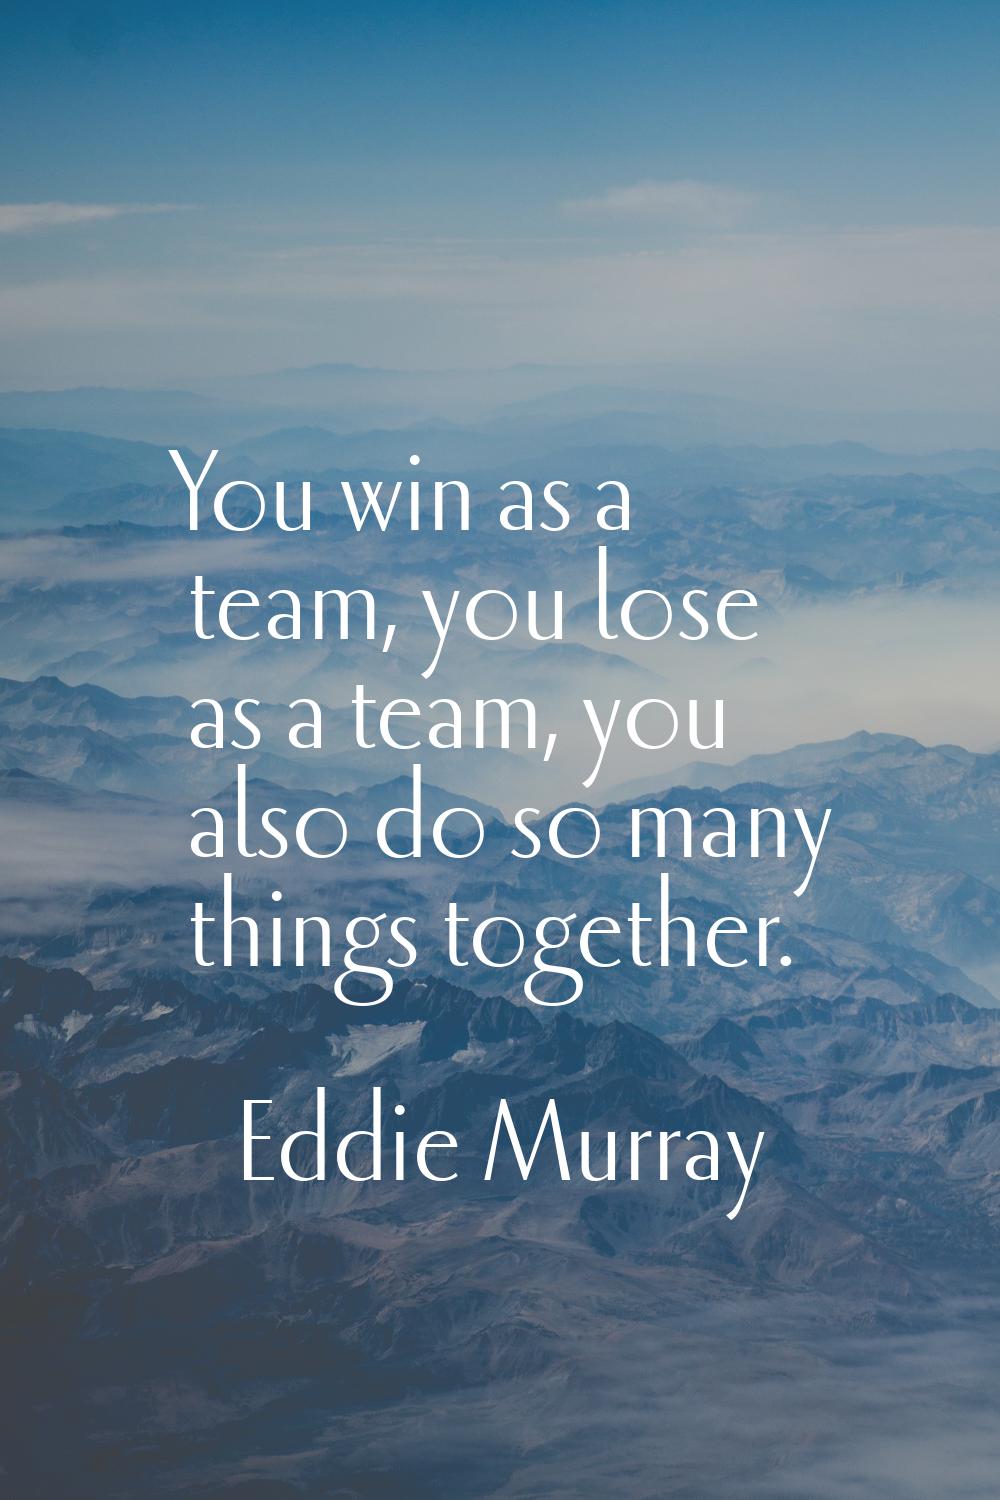 You win as a team, you lose as a team, you also do so many things together.